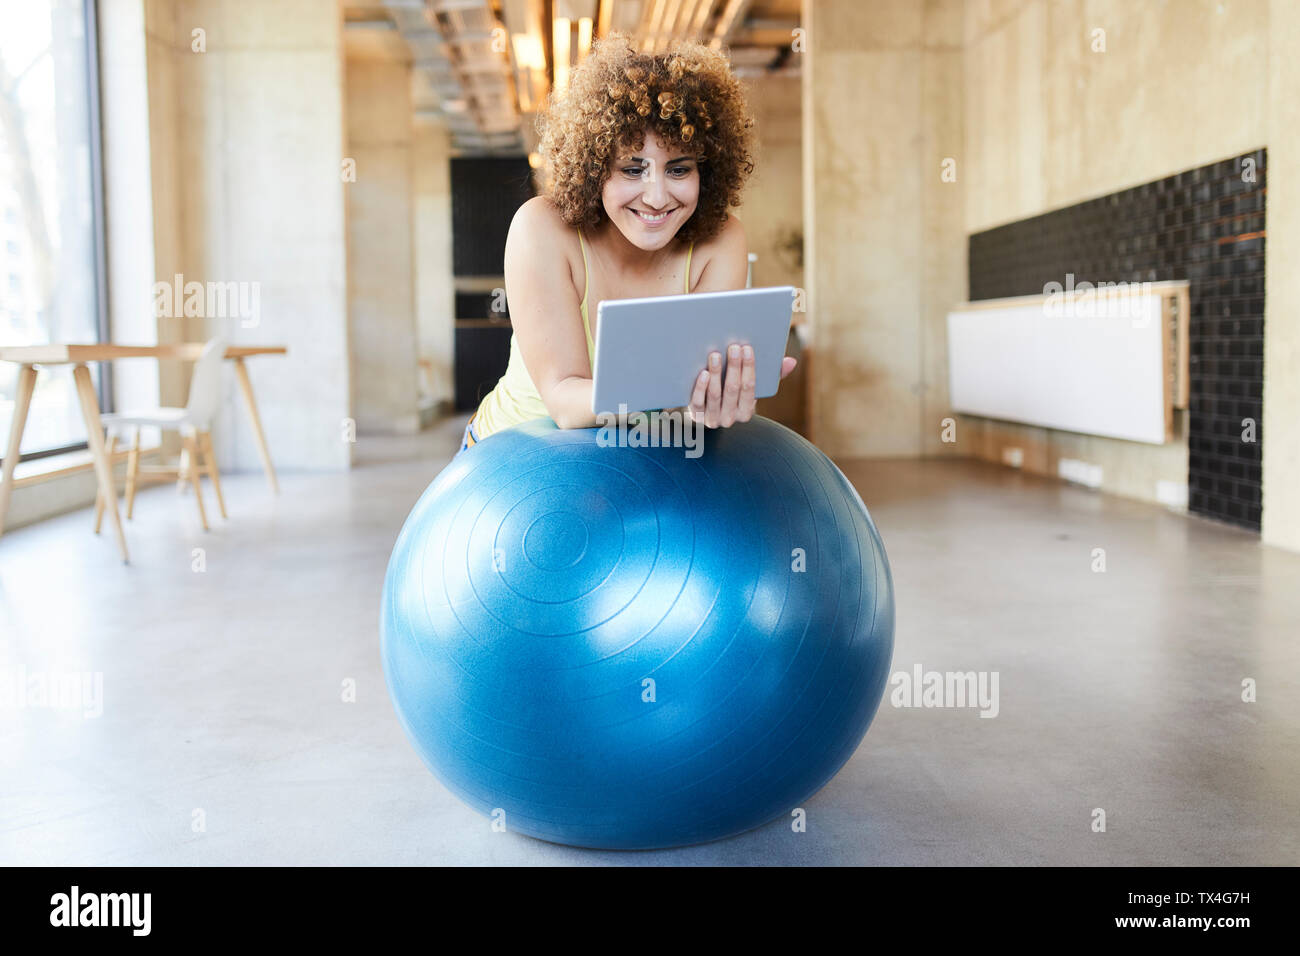 Smiling woman using tablet on fitness ball in modern office Stock Photo